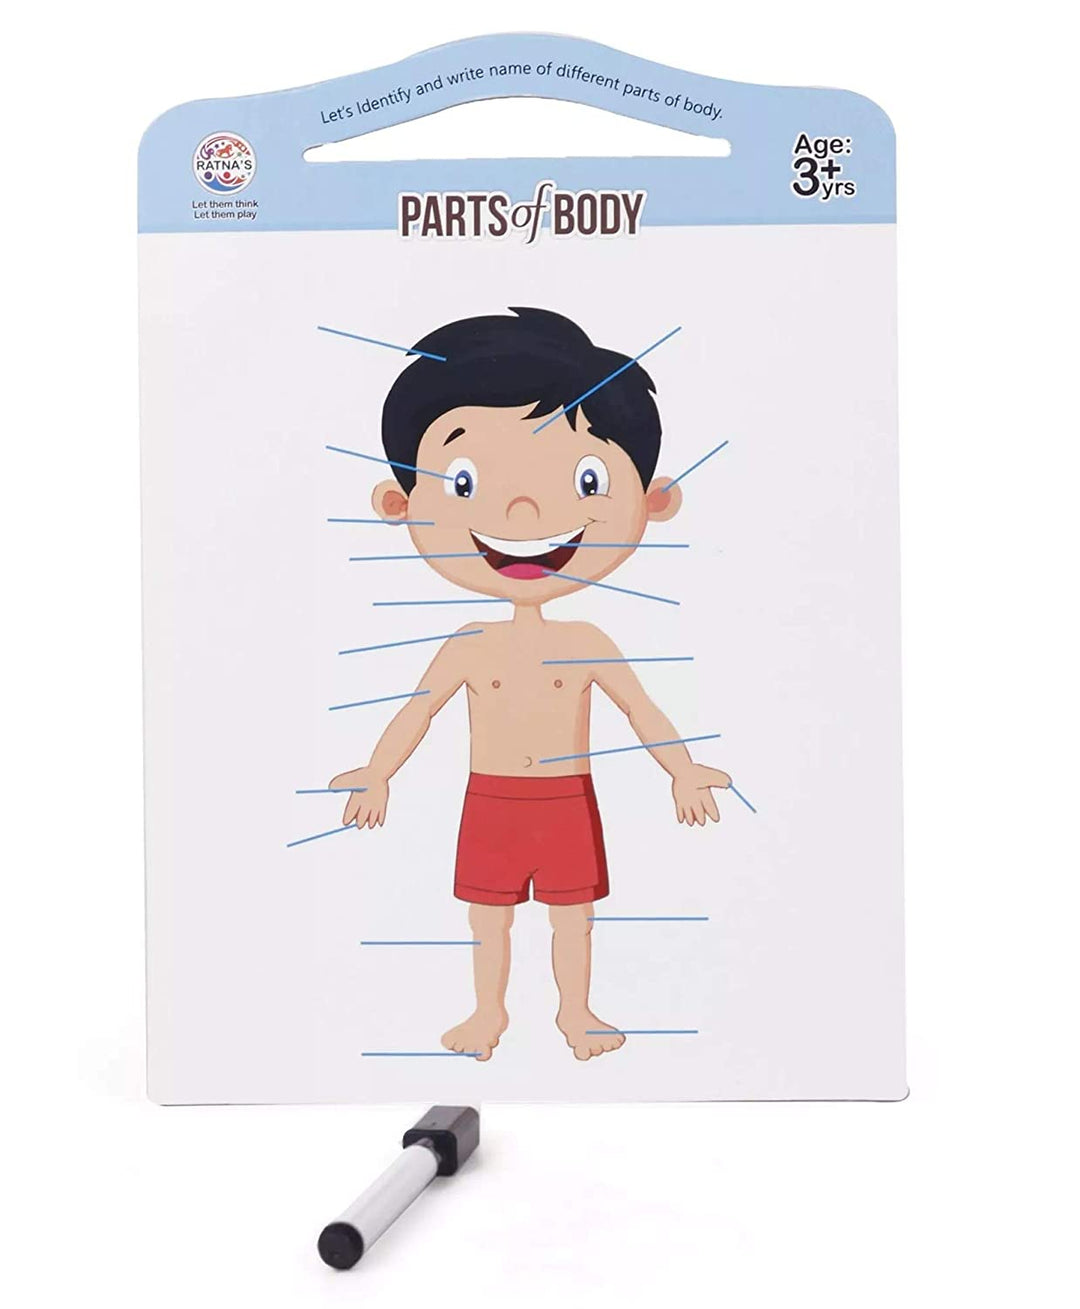 RATNA'S Parts of Body Jigsaw Puzzle for Kids with 2 in 1 Write and Wipe Board with Body Parts 24 Pieces